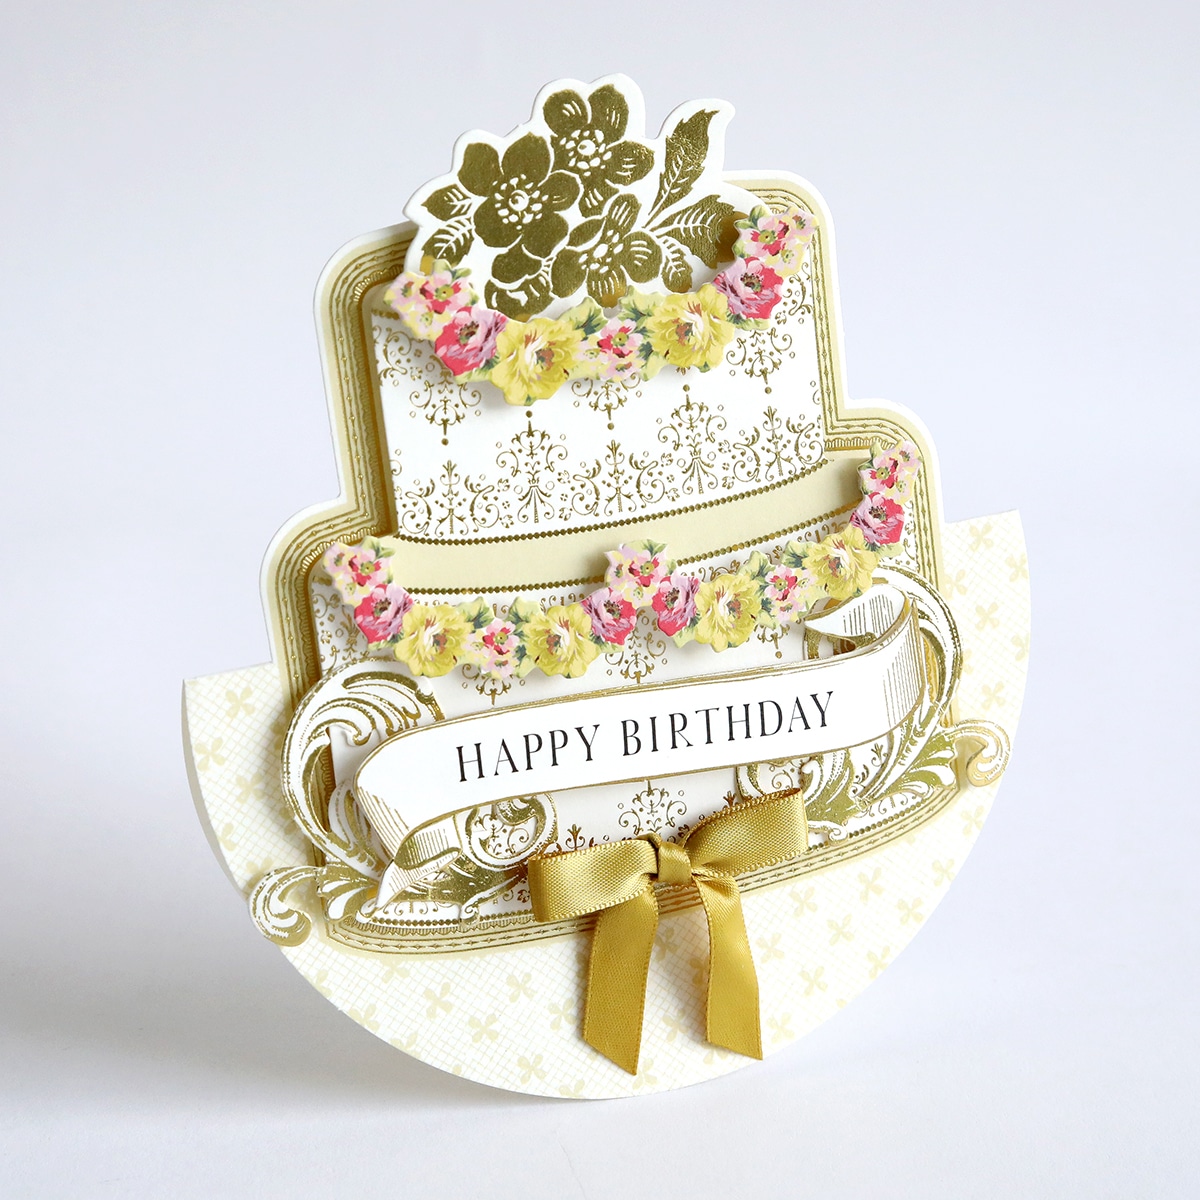 A happy birthday card with gold ribbon and flowers.